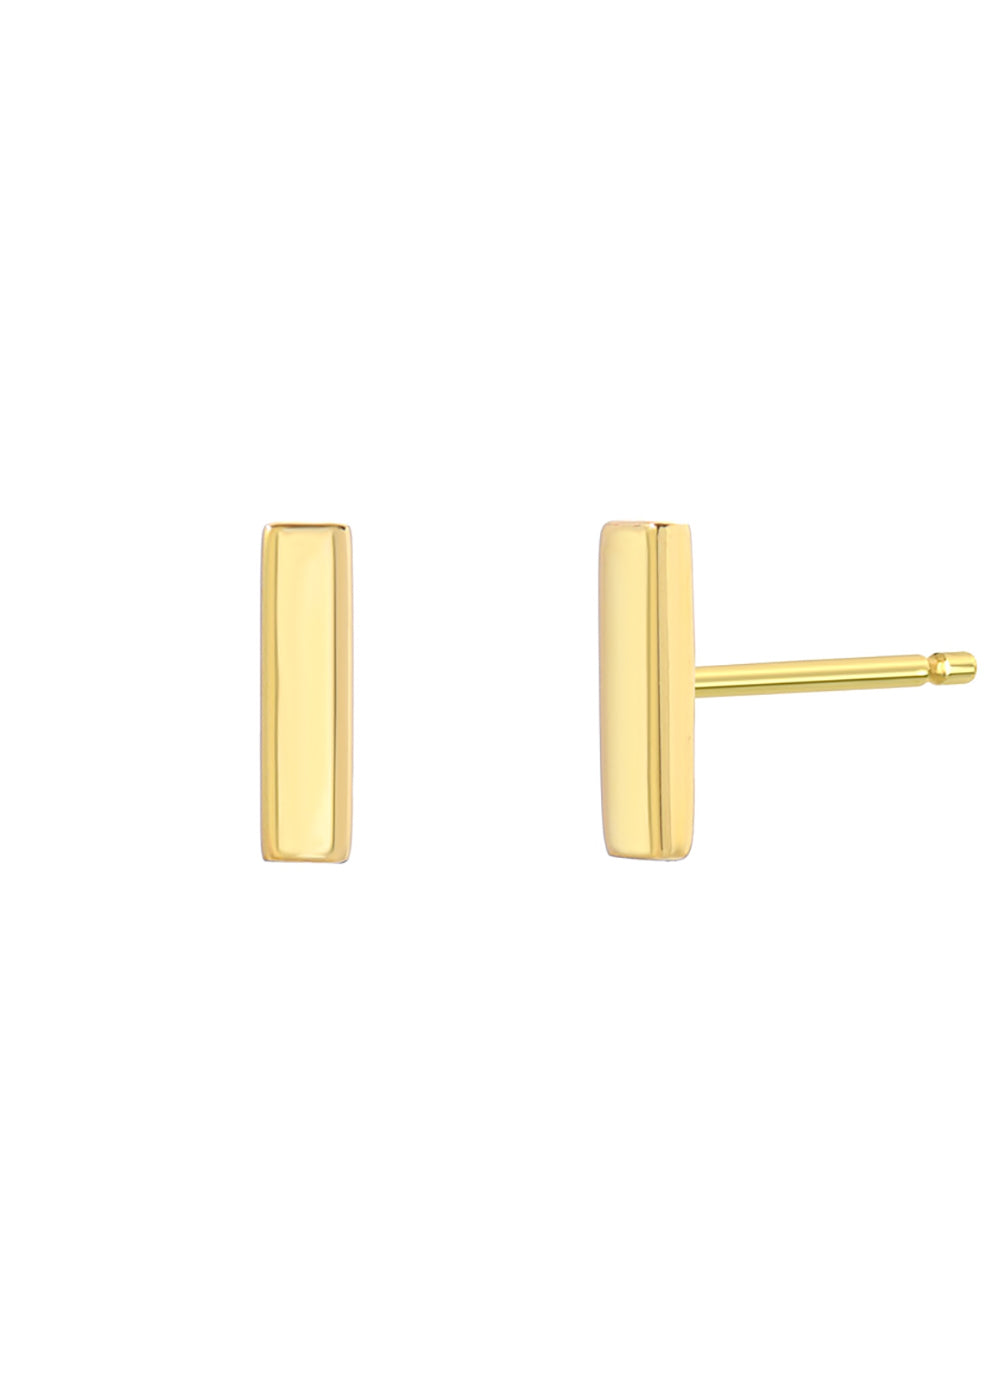 Luna and Fin - 14K Bar Earring in Yellow Gold